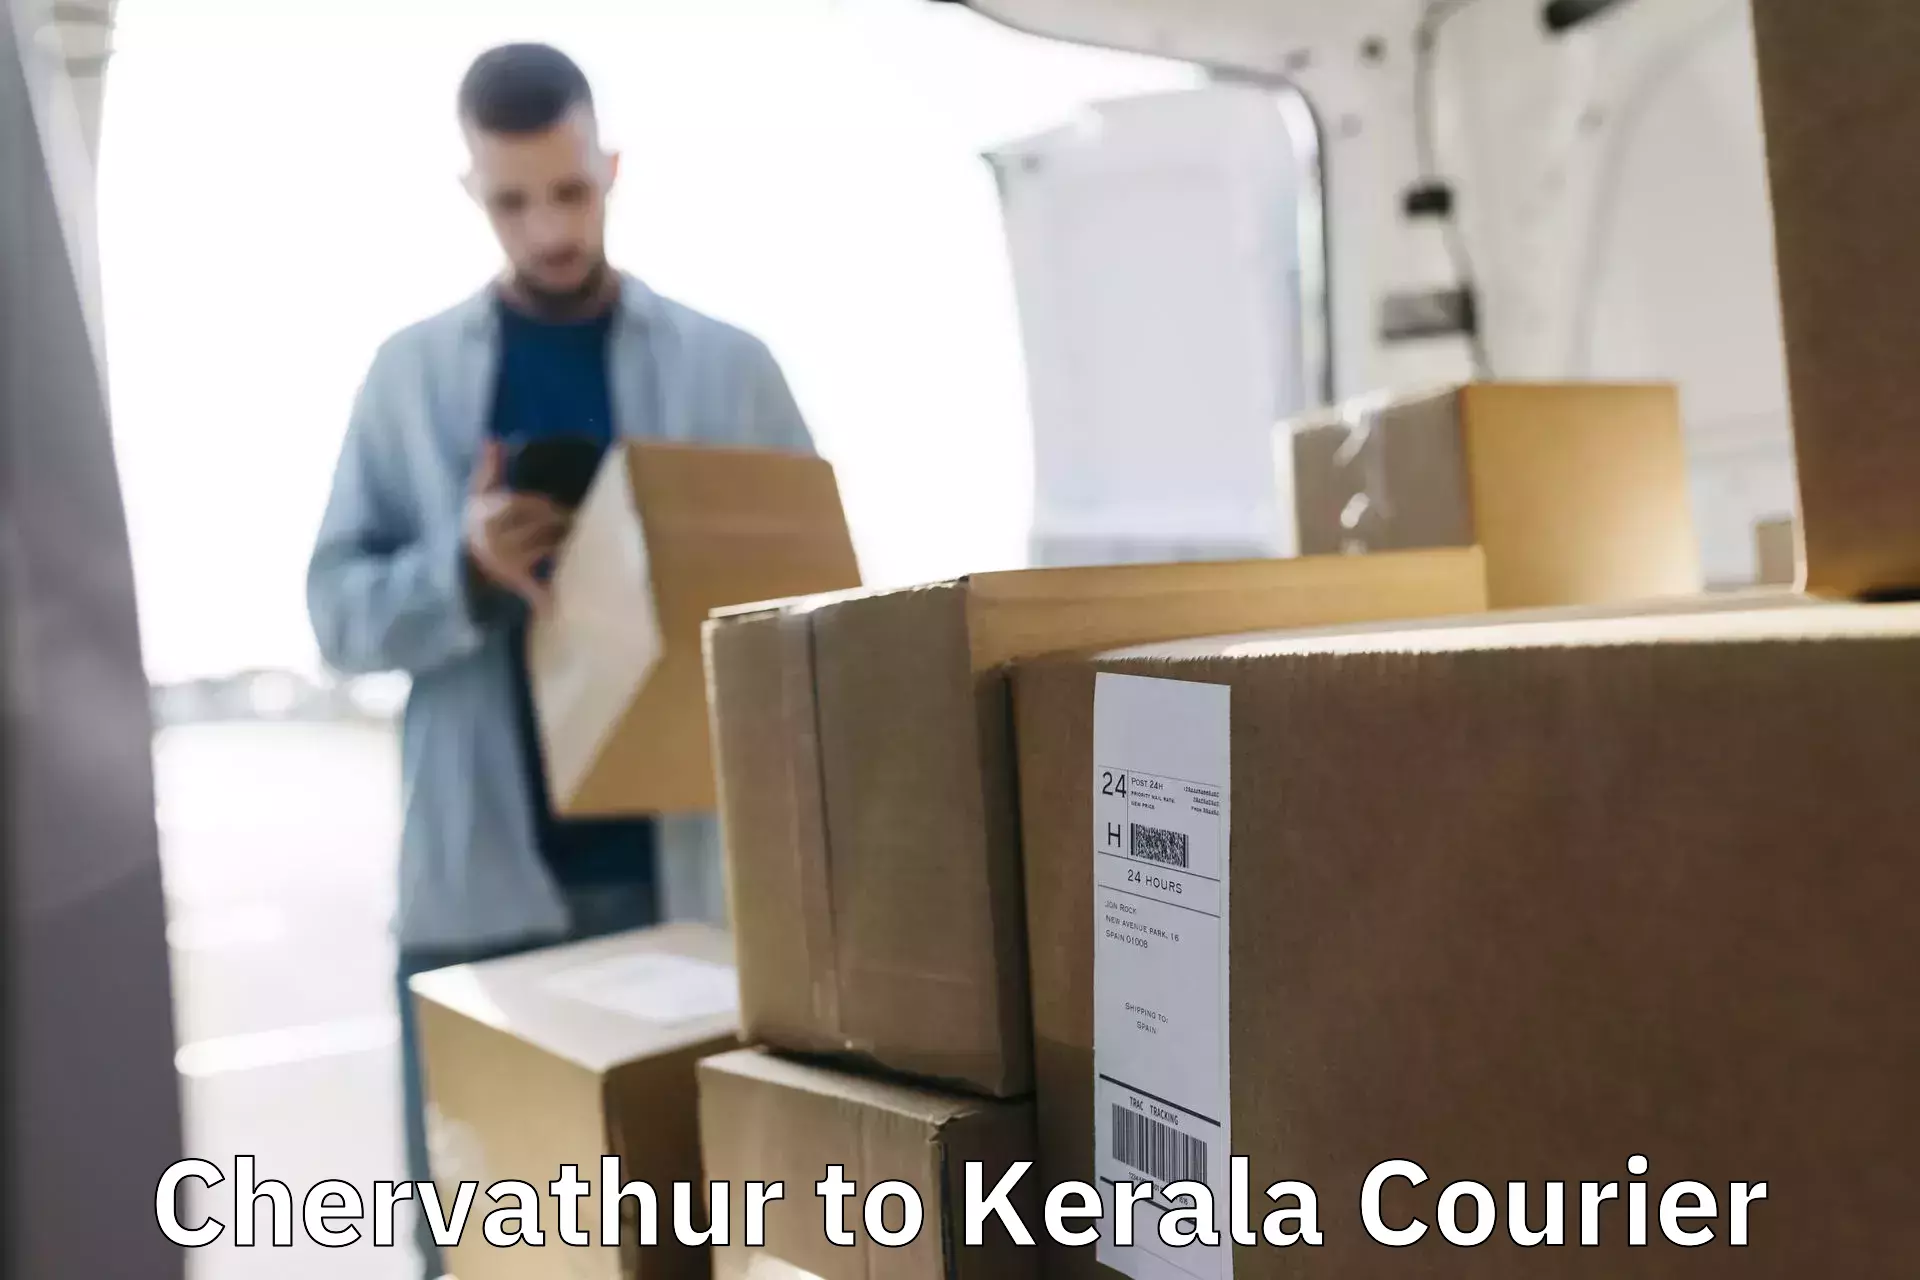 Special handling courier Chervathur to Ernakulam